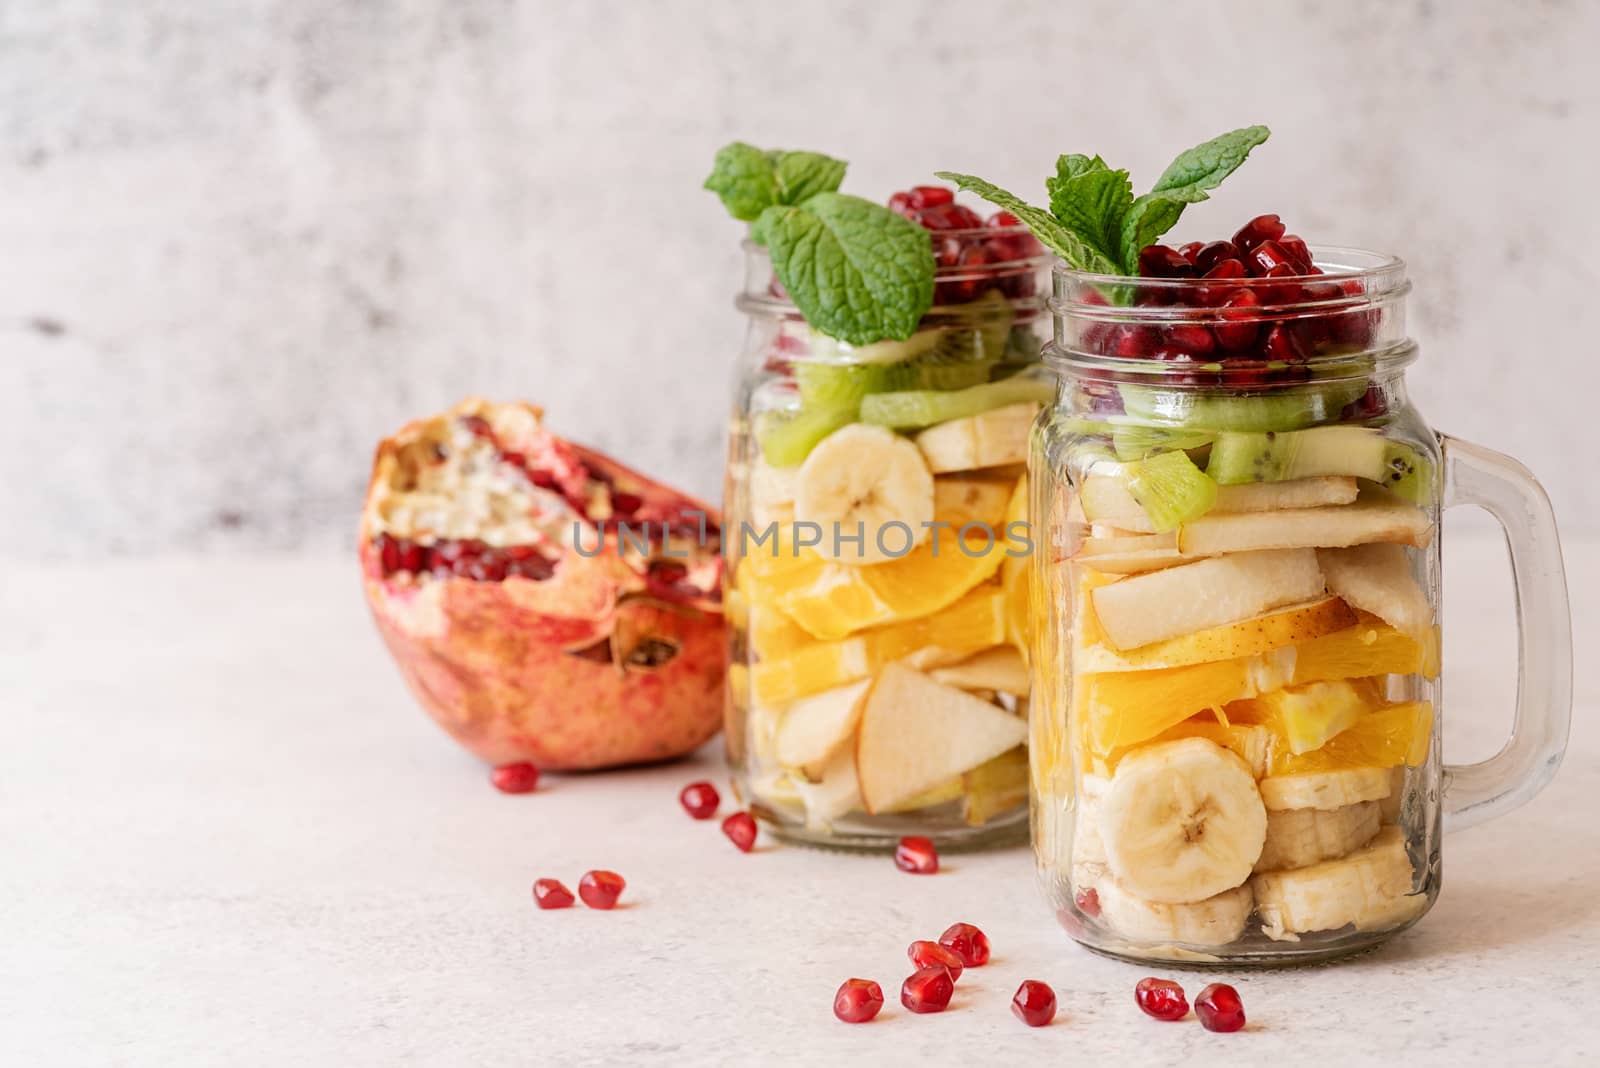 Colorful fruit salad in a mason jar on rustic concrete background front view by Desperada